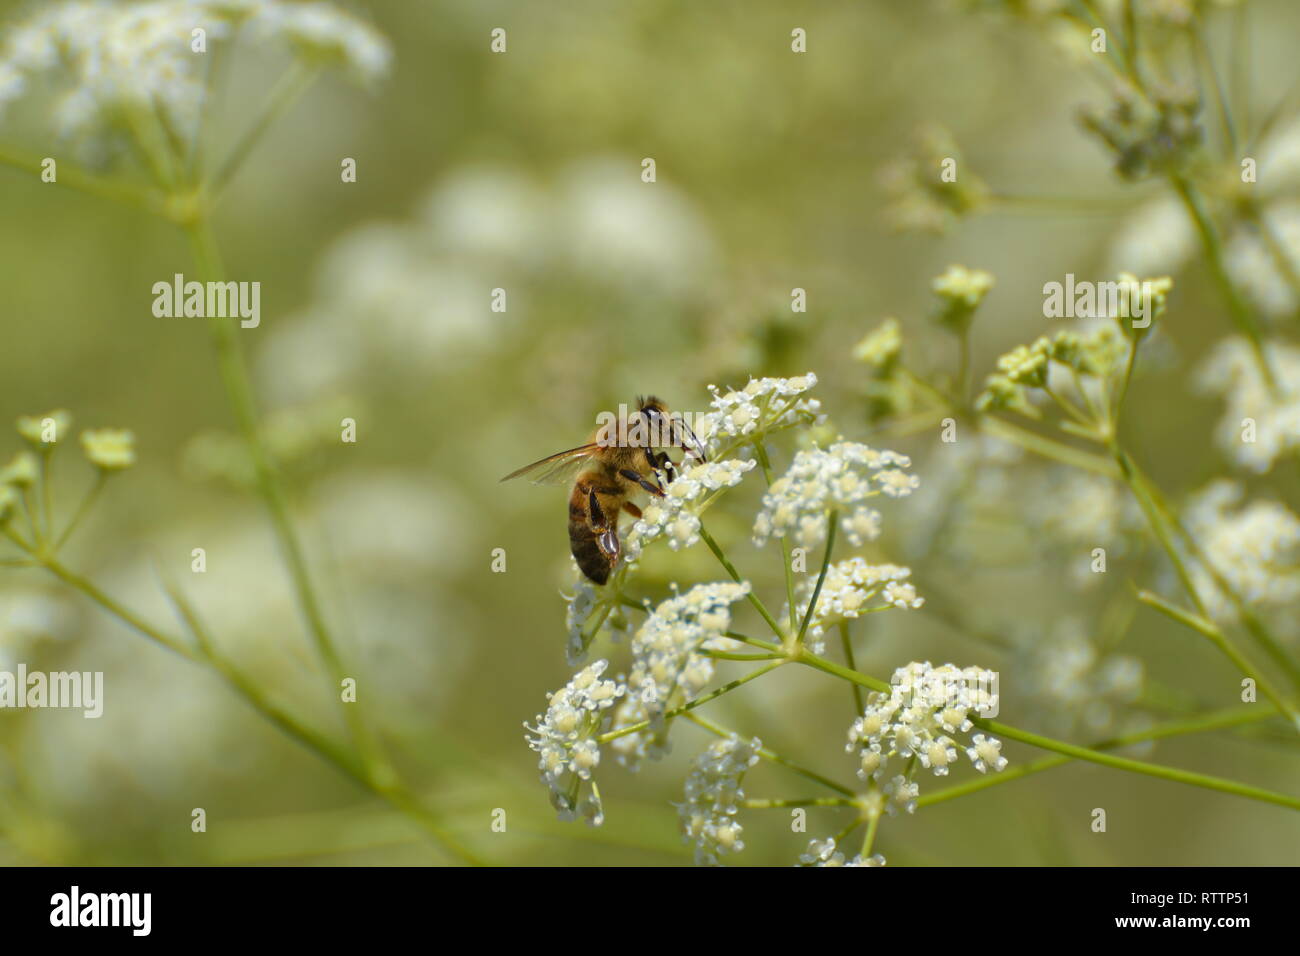 Western Honey bee on foraging Stock Photo